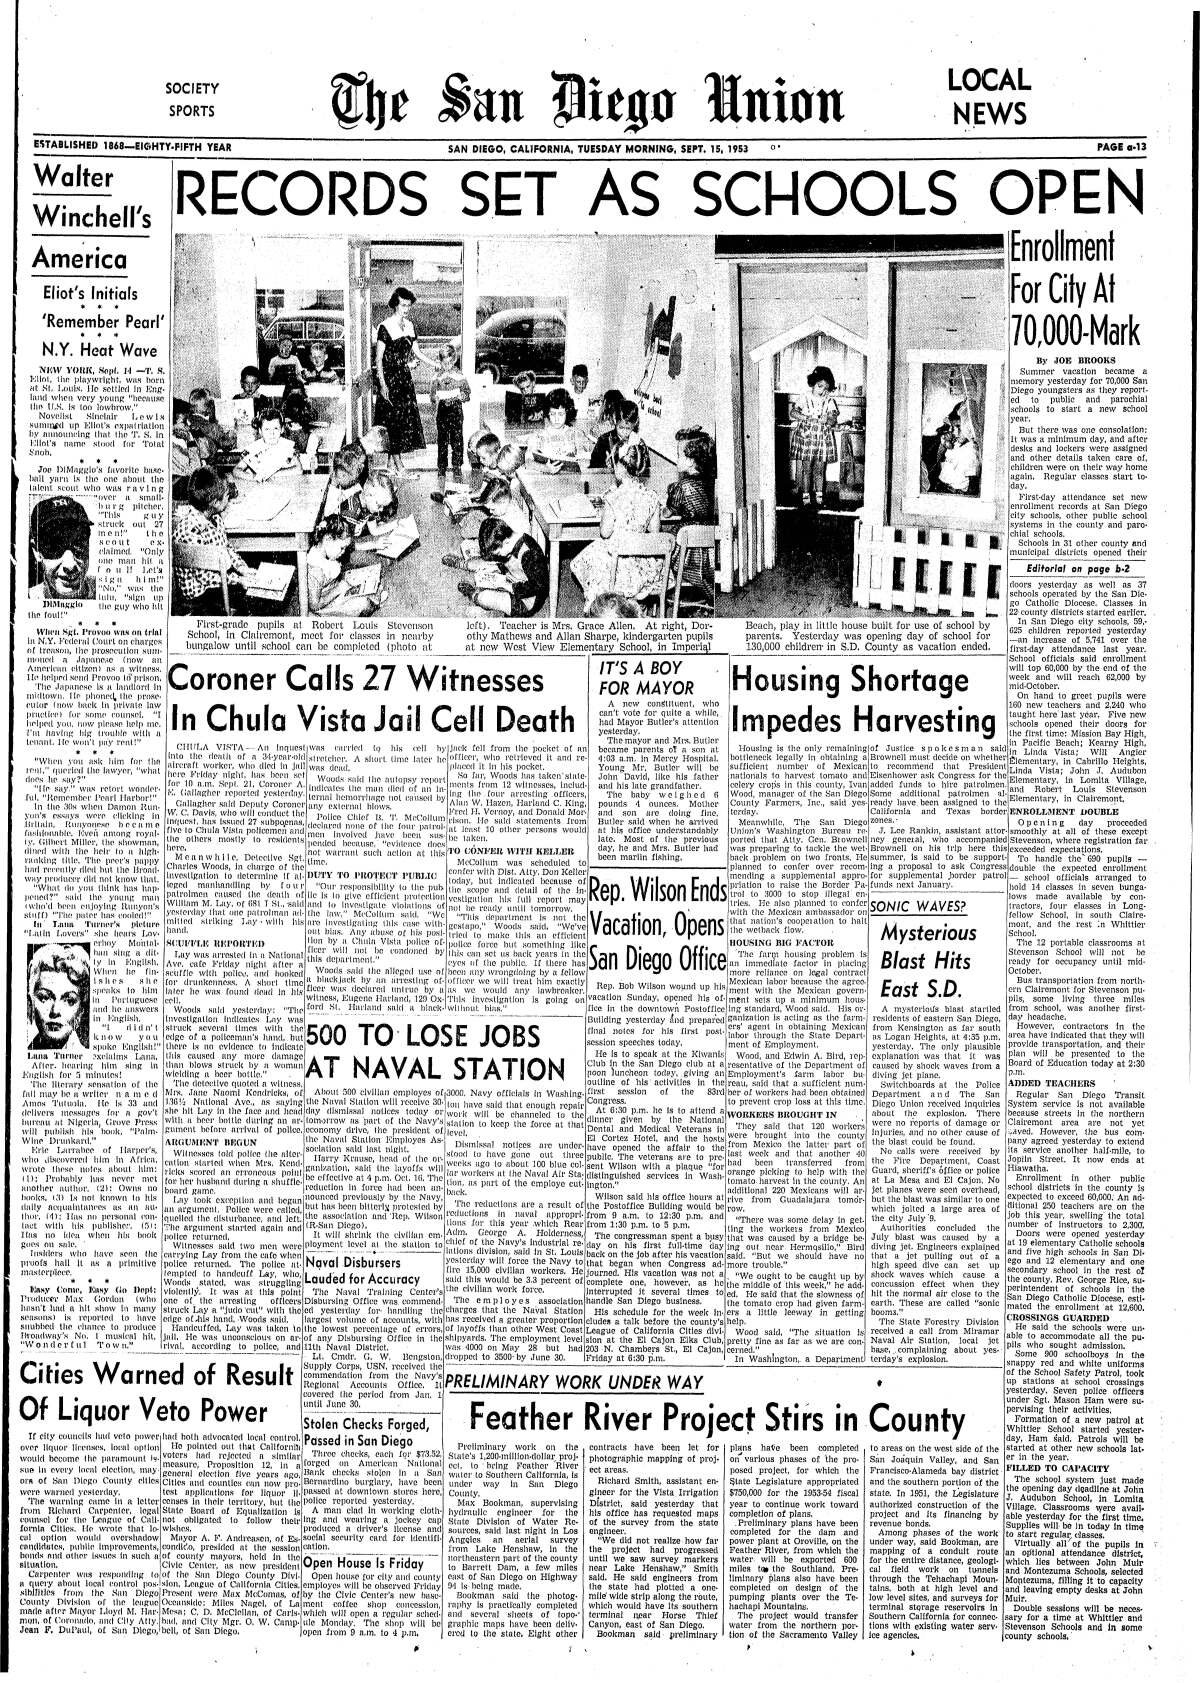 Sept. 15, 1953  newspaper page on with headline "Records Set as School Opens"